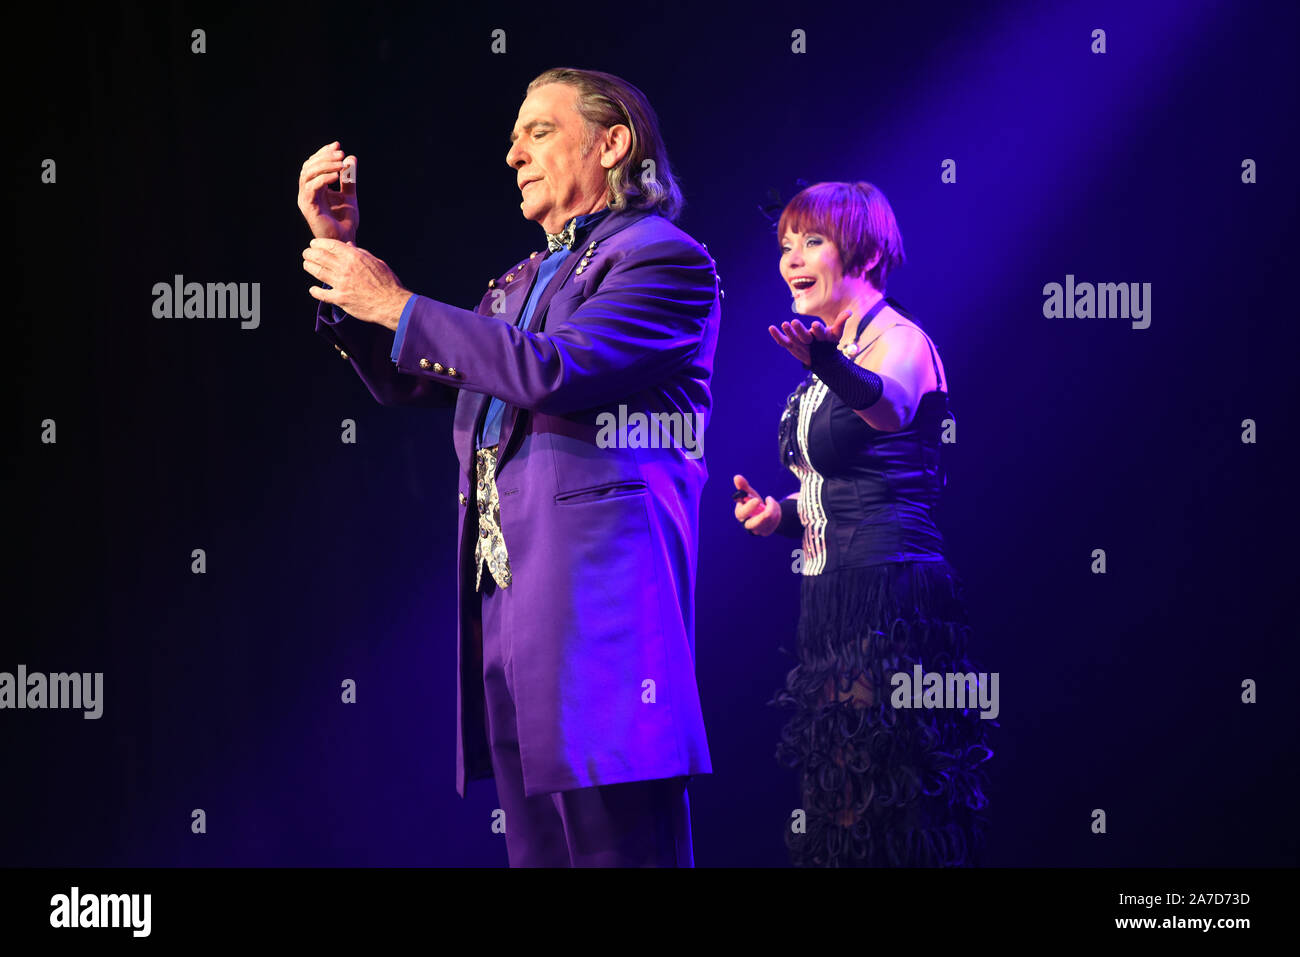 Duesseldorf, Germany. 31st Oct, 2019. At the premiere of the new Apollo Varieté programme 'Magic Hotel', 'Sonny&Galina' (magicians and comedians) will pose on stage at the 'Apollo Varieté' in Düsseldorf until 12 January 2020. Credit: Horst Ossinger//dpa/Alamy Live News Stock Photo